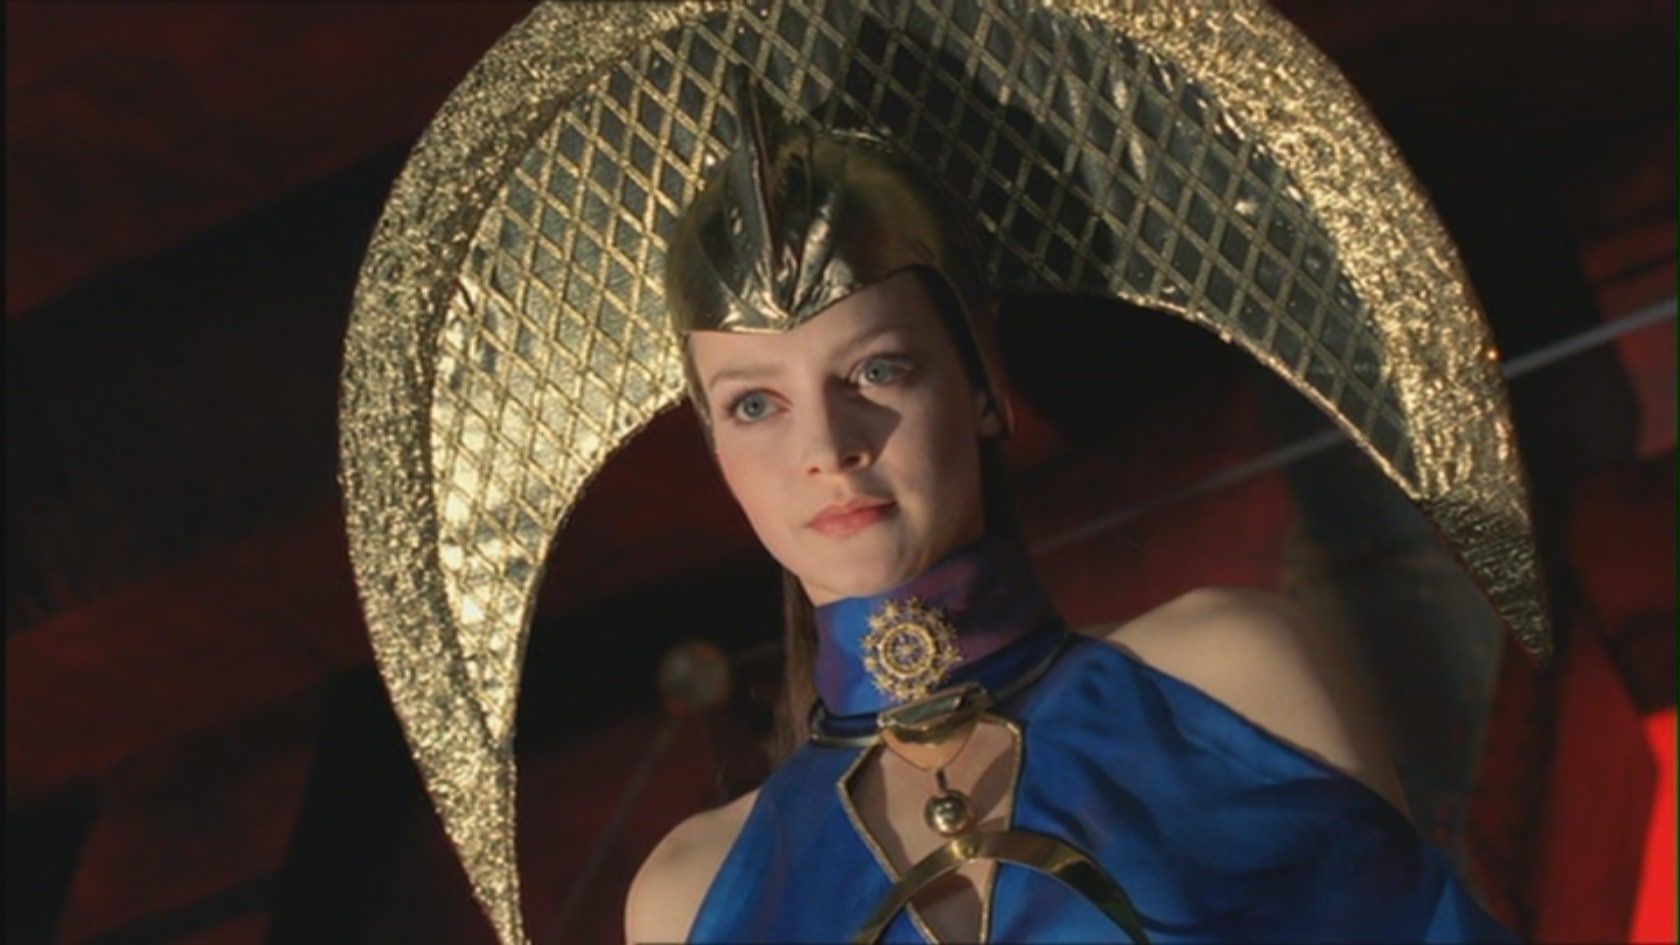 Queen Amidala's hat wasn't gold. One point goes to Dune. (Image: Syfy)